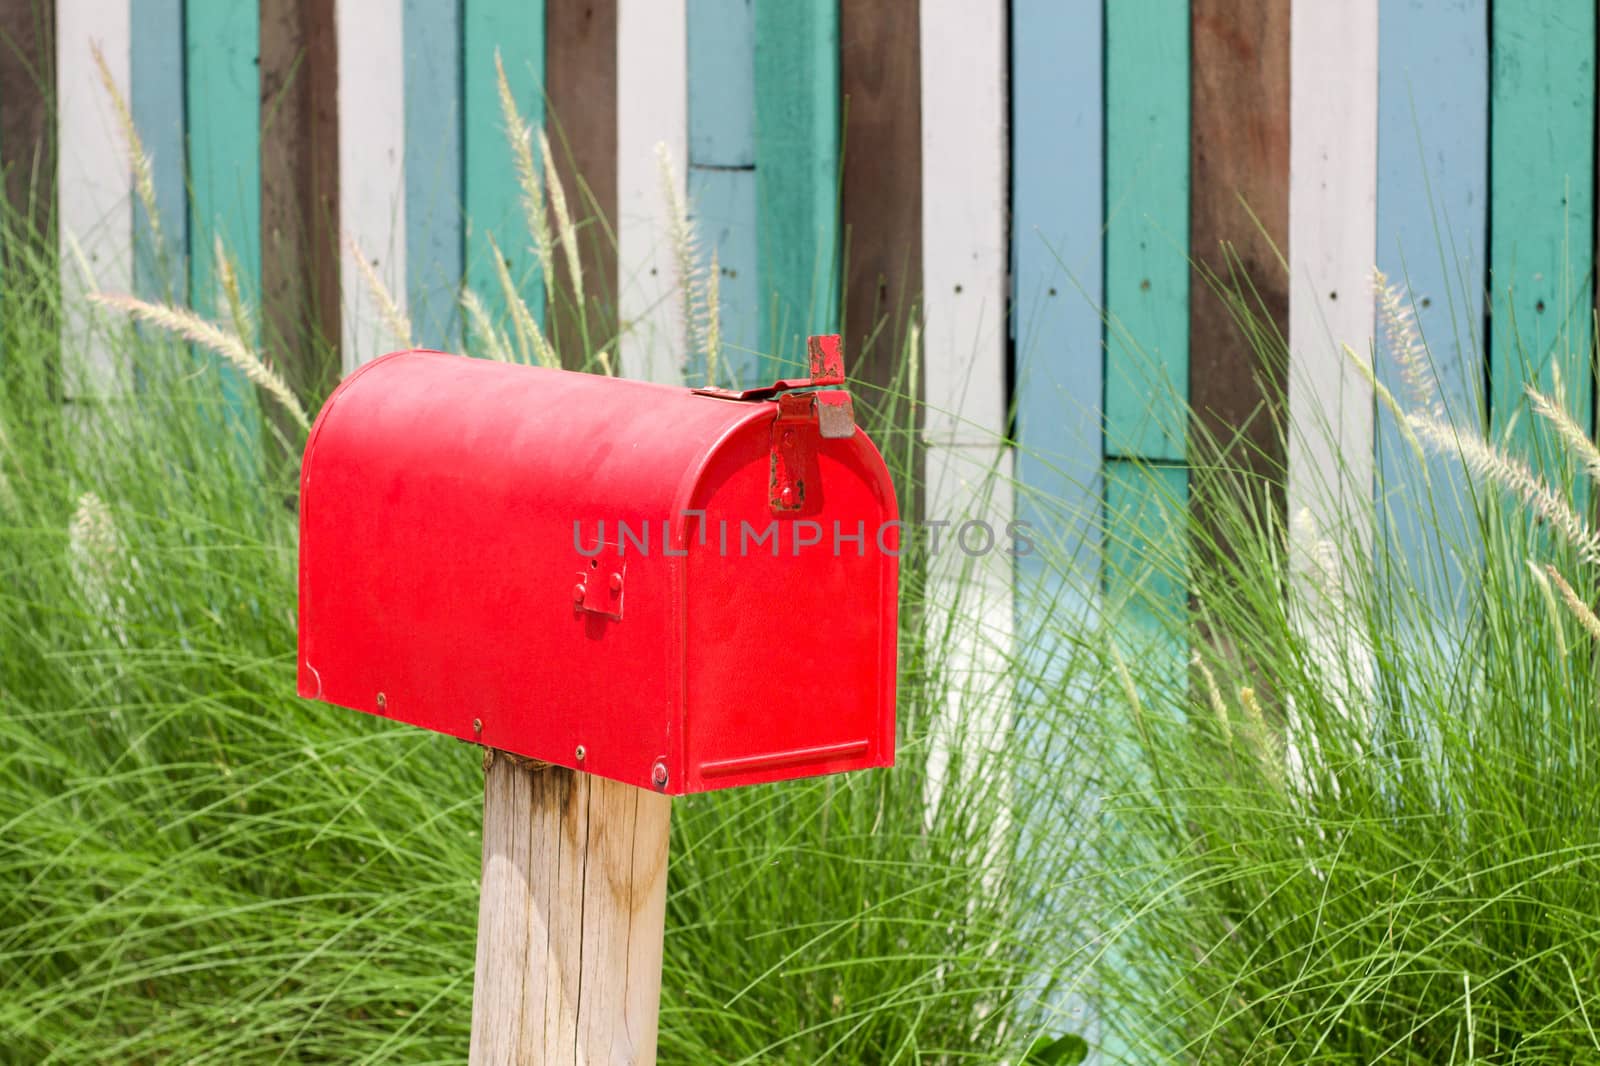 A plain Red Mailbox  in front of some bushes.